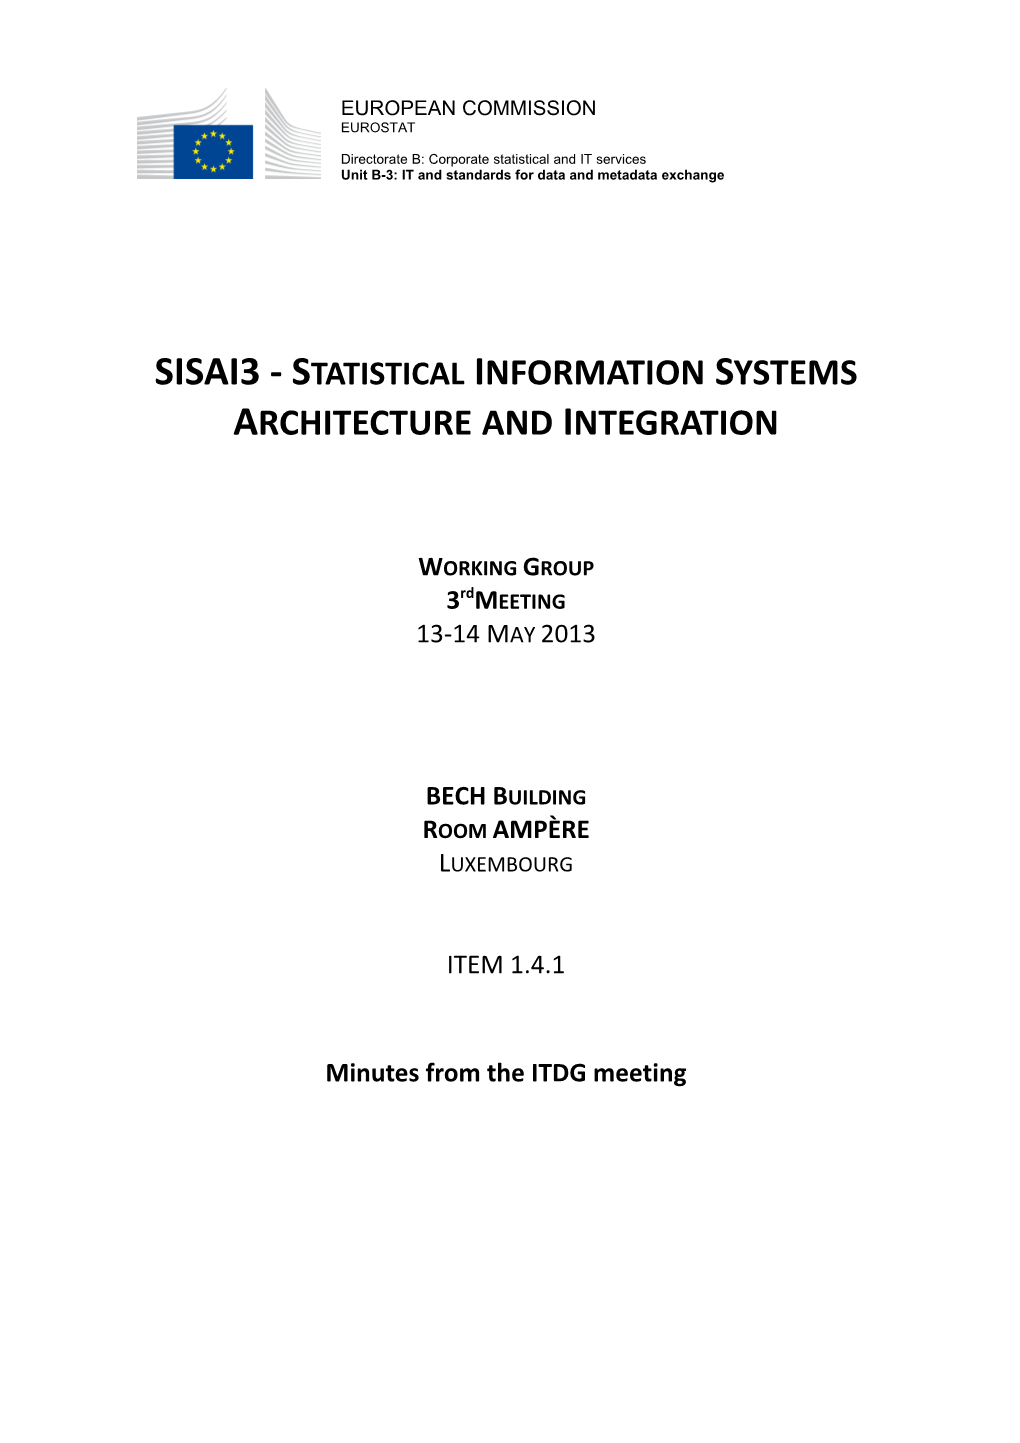 Sisai3 - Statistical Information Systems Architectureand Integration